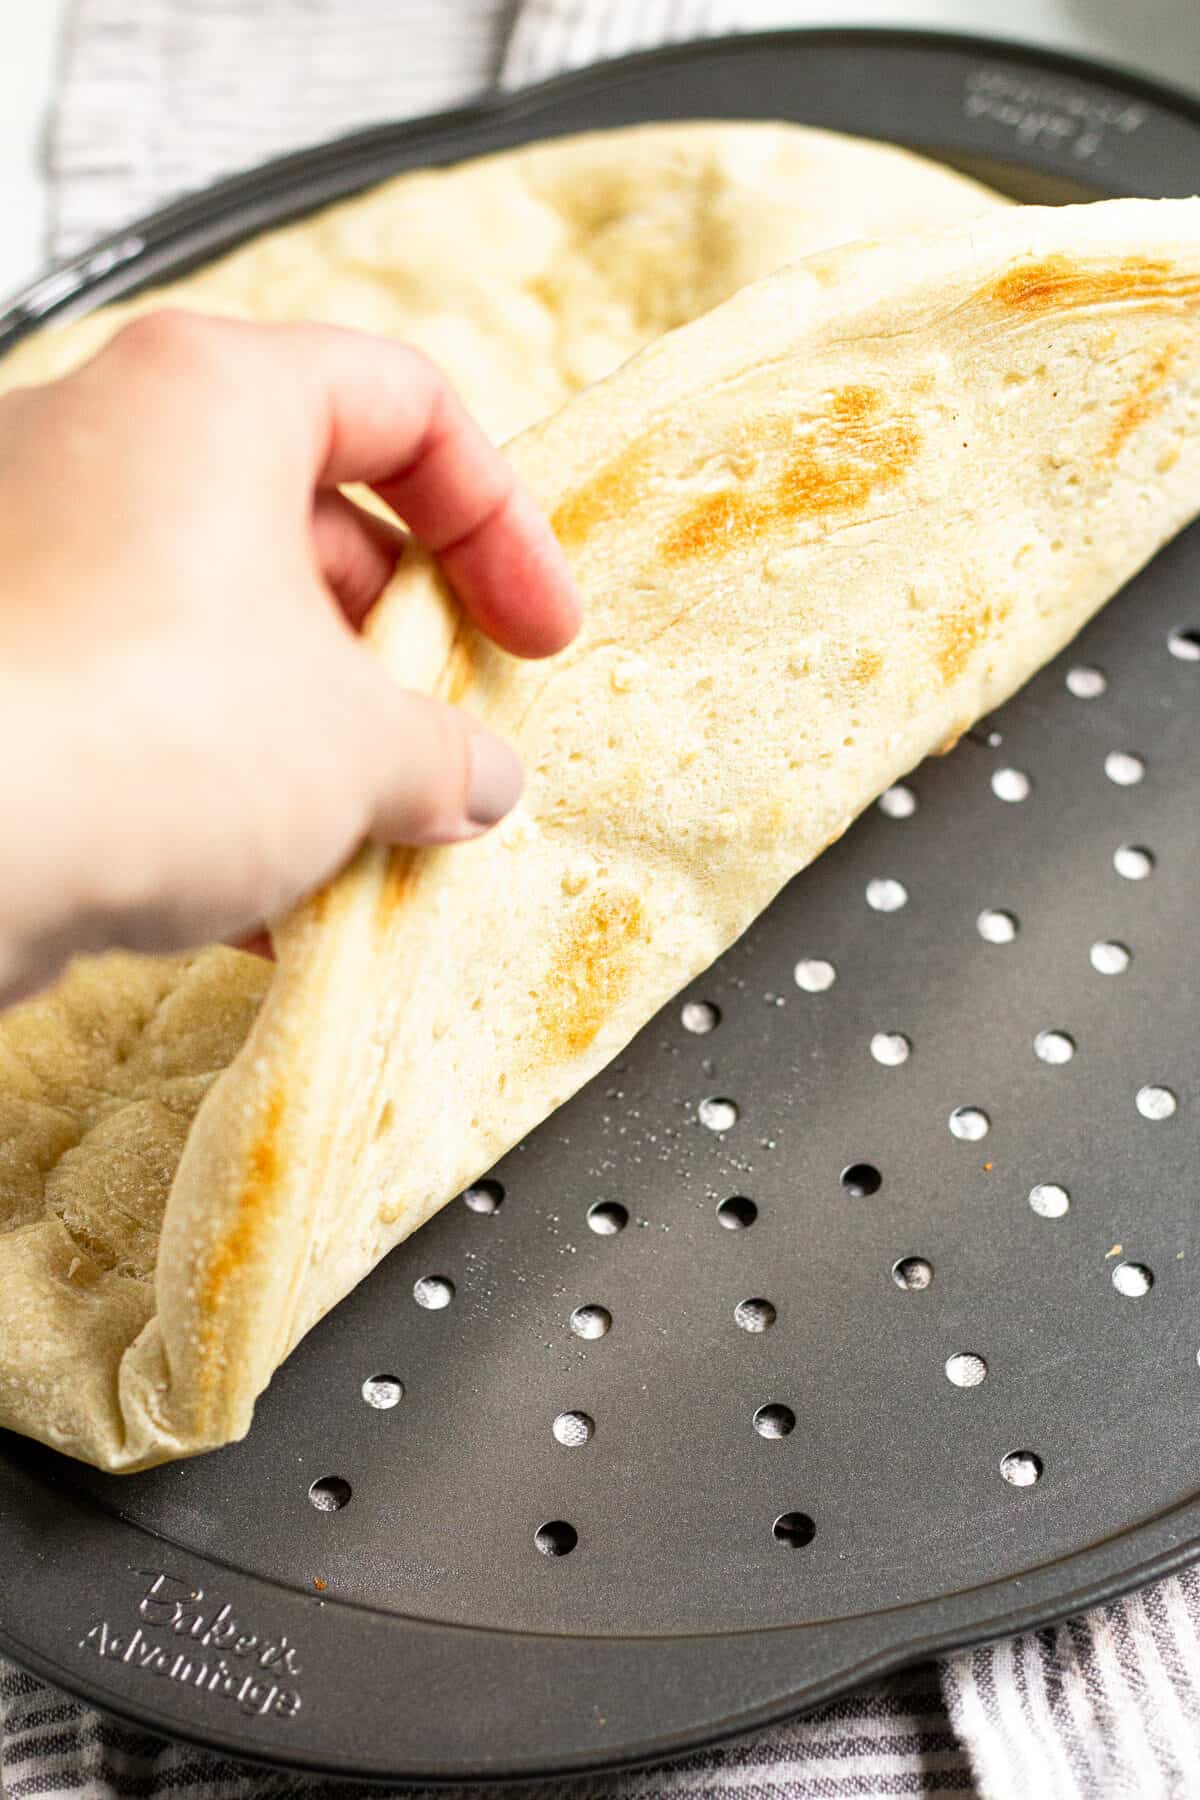 Pizza dough on a pizza pan that is partially baked and being folded to show you the under side 